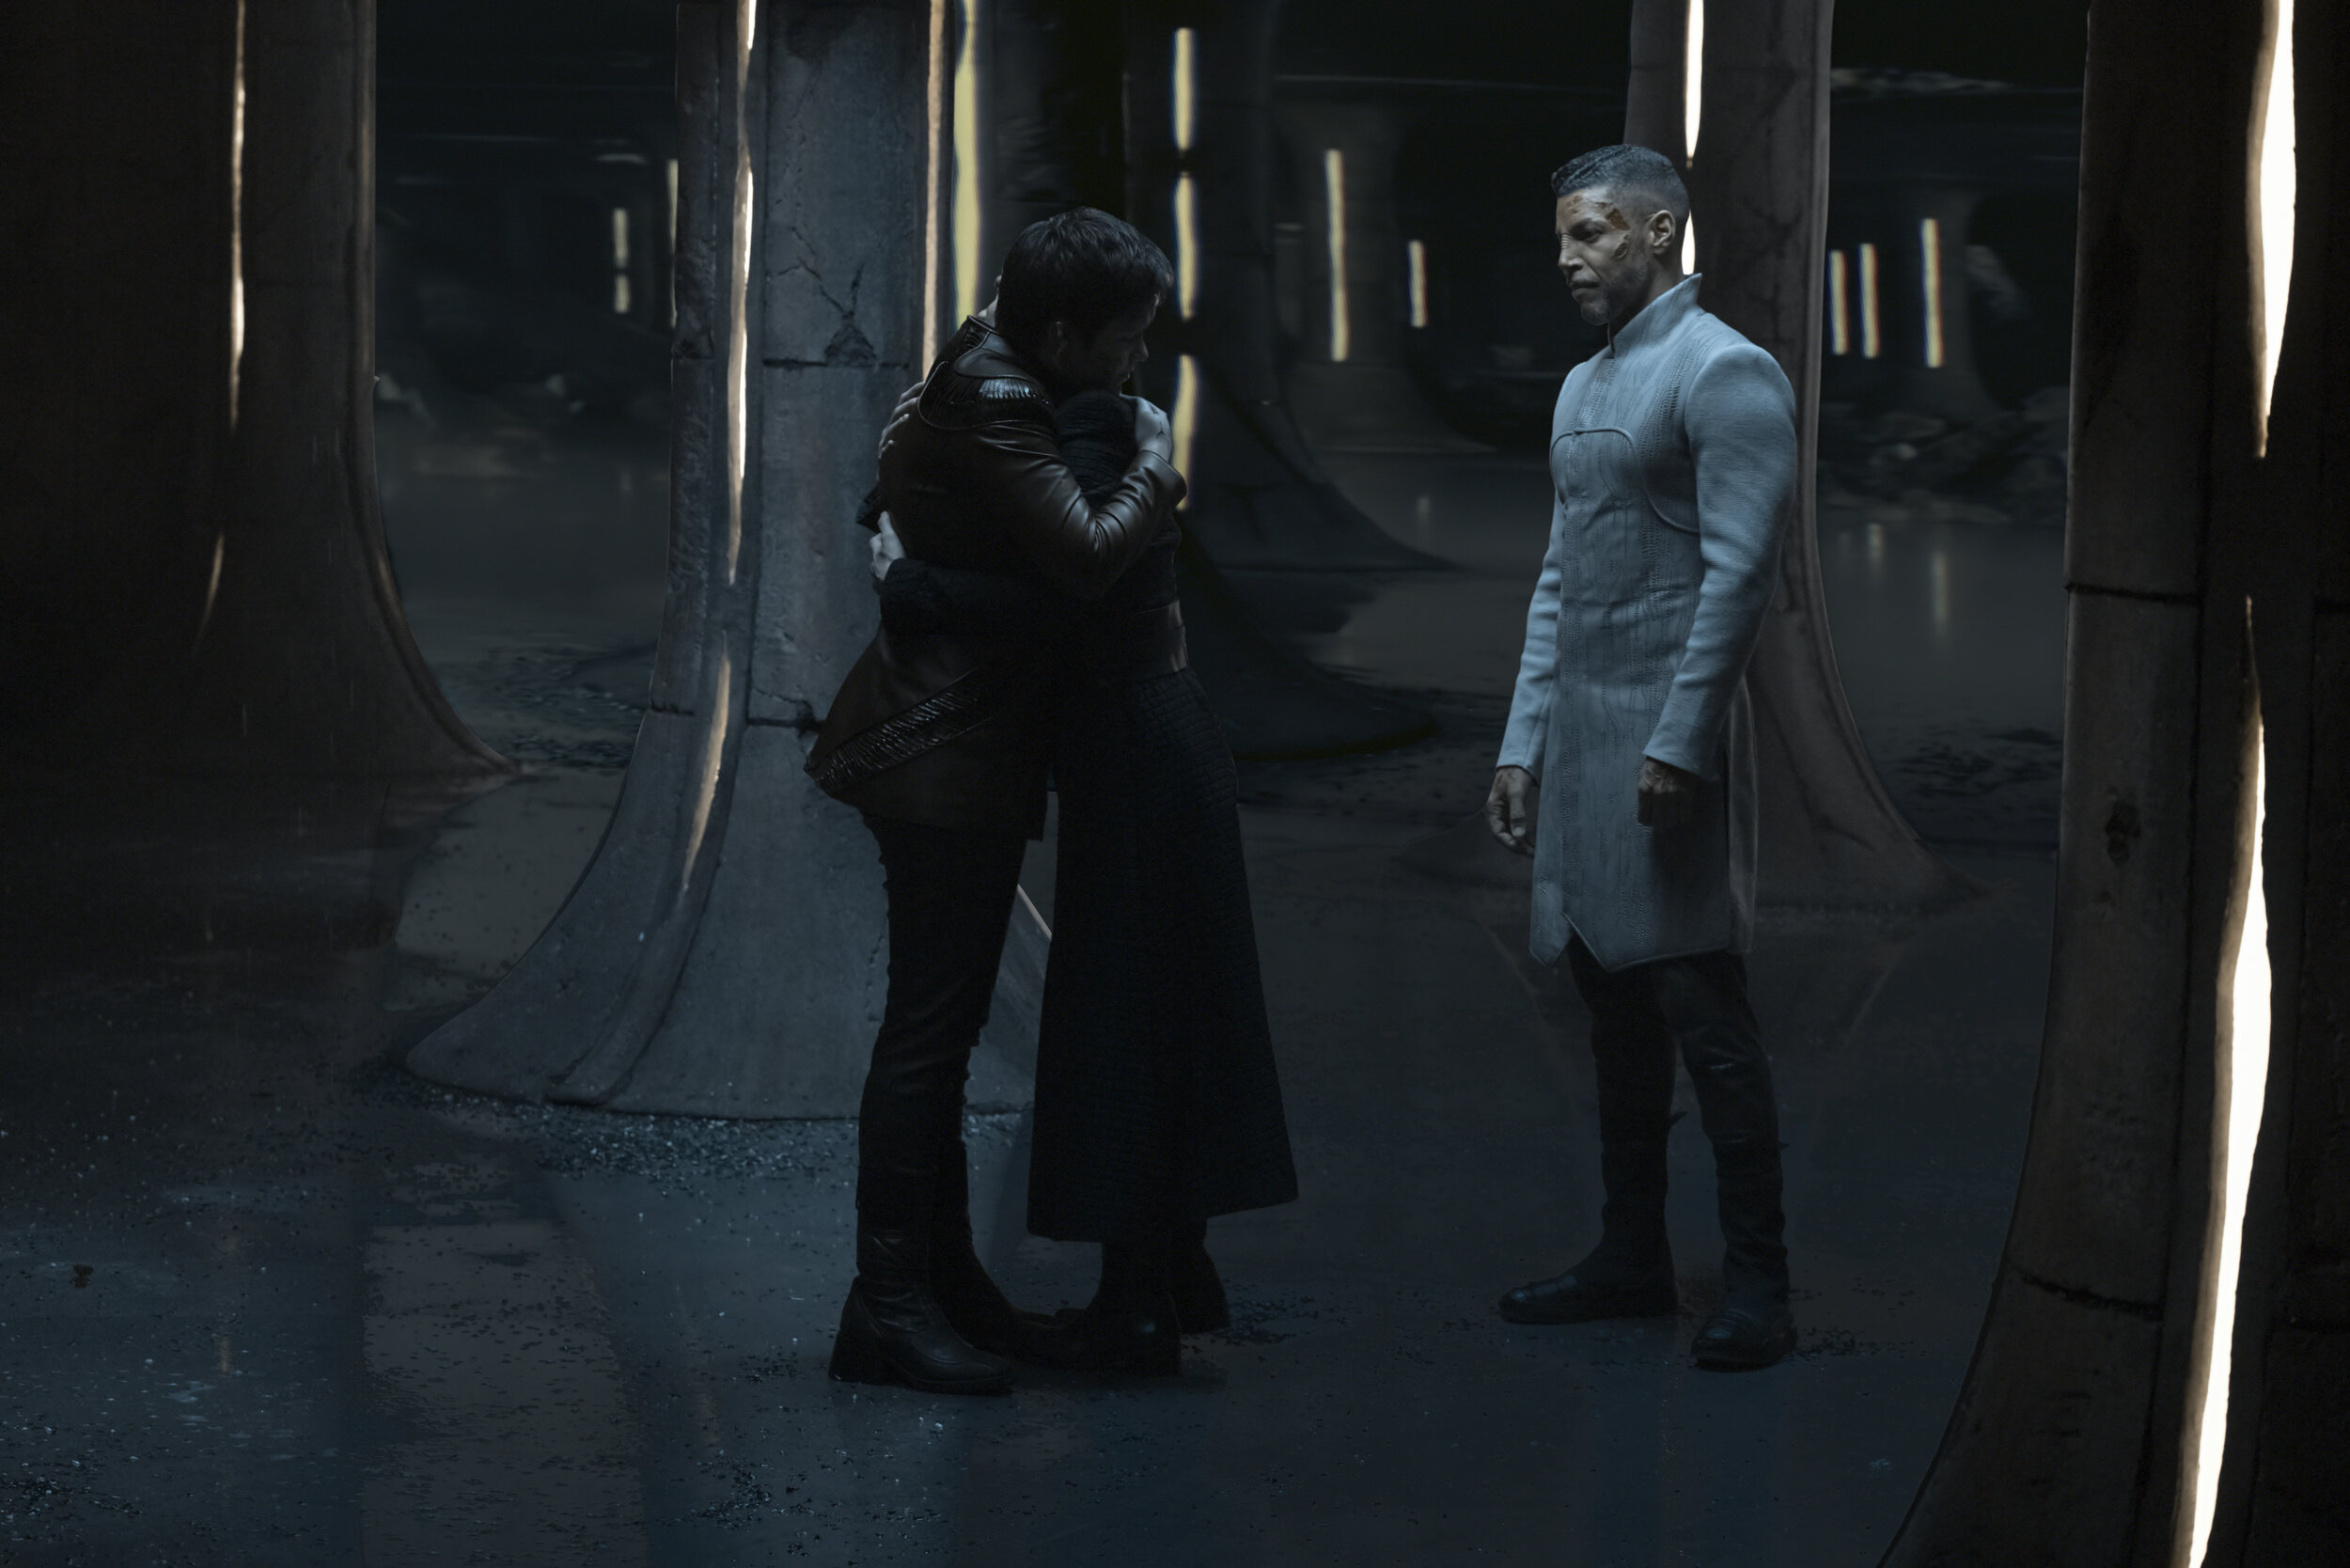   "The Hope That is You, Part 2" -- Ep#313 -- Pictured: Blu del Barrio as Adira, Ian Alexander as Gray and Wilson Cruz as Dr. Hugh Culber of the CBS All Access series STAR TREK: DISCOVERY. Photo Cr: Michael Gibson/CBS ©2020 CBS Interactive, Inc. All 